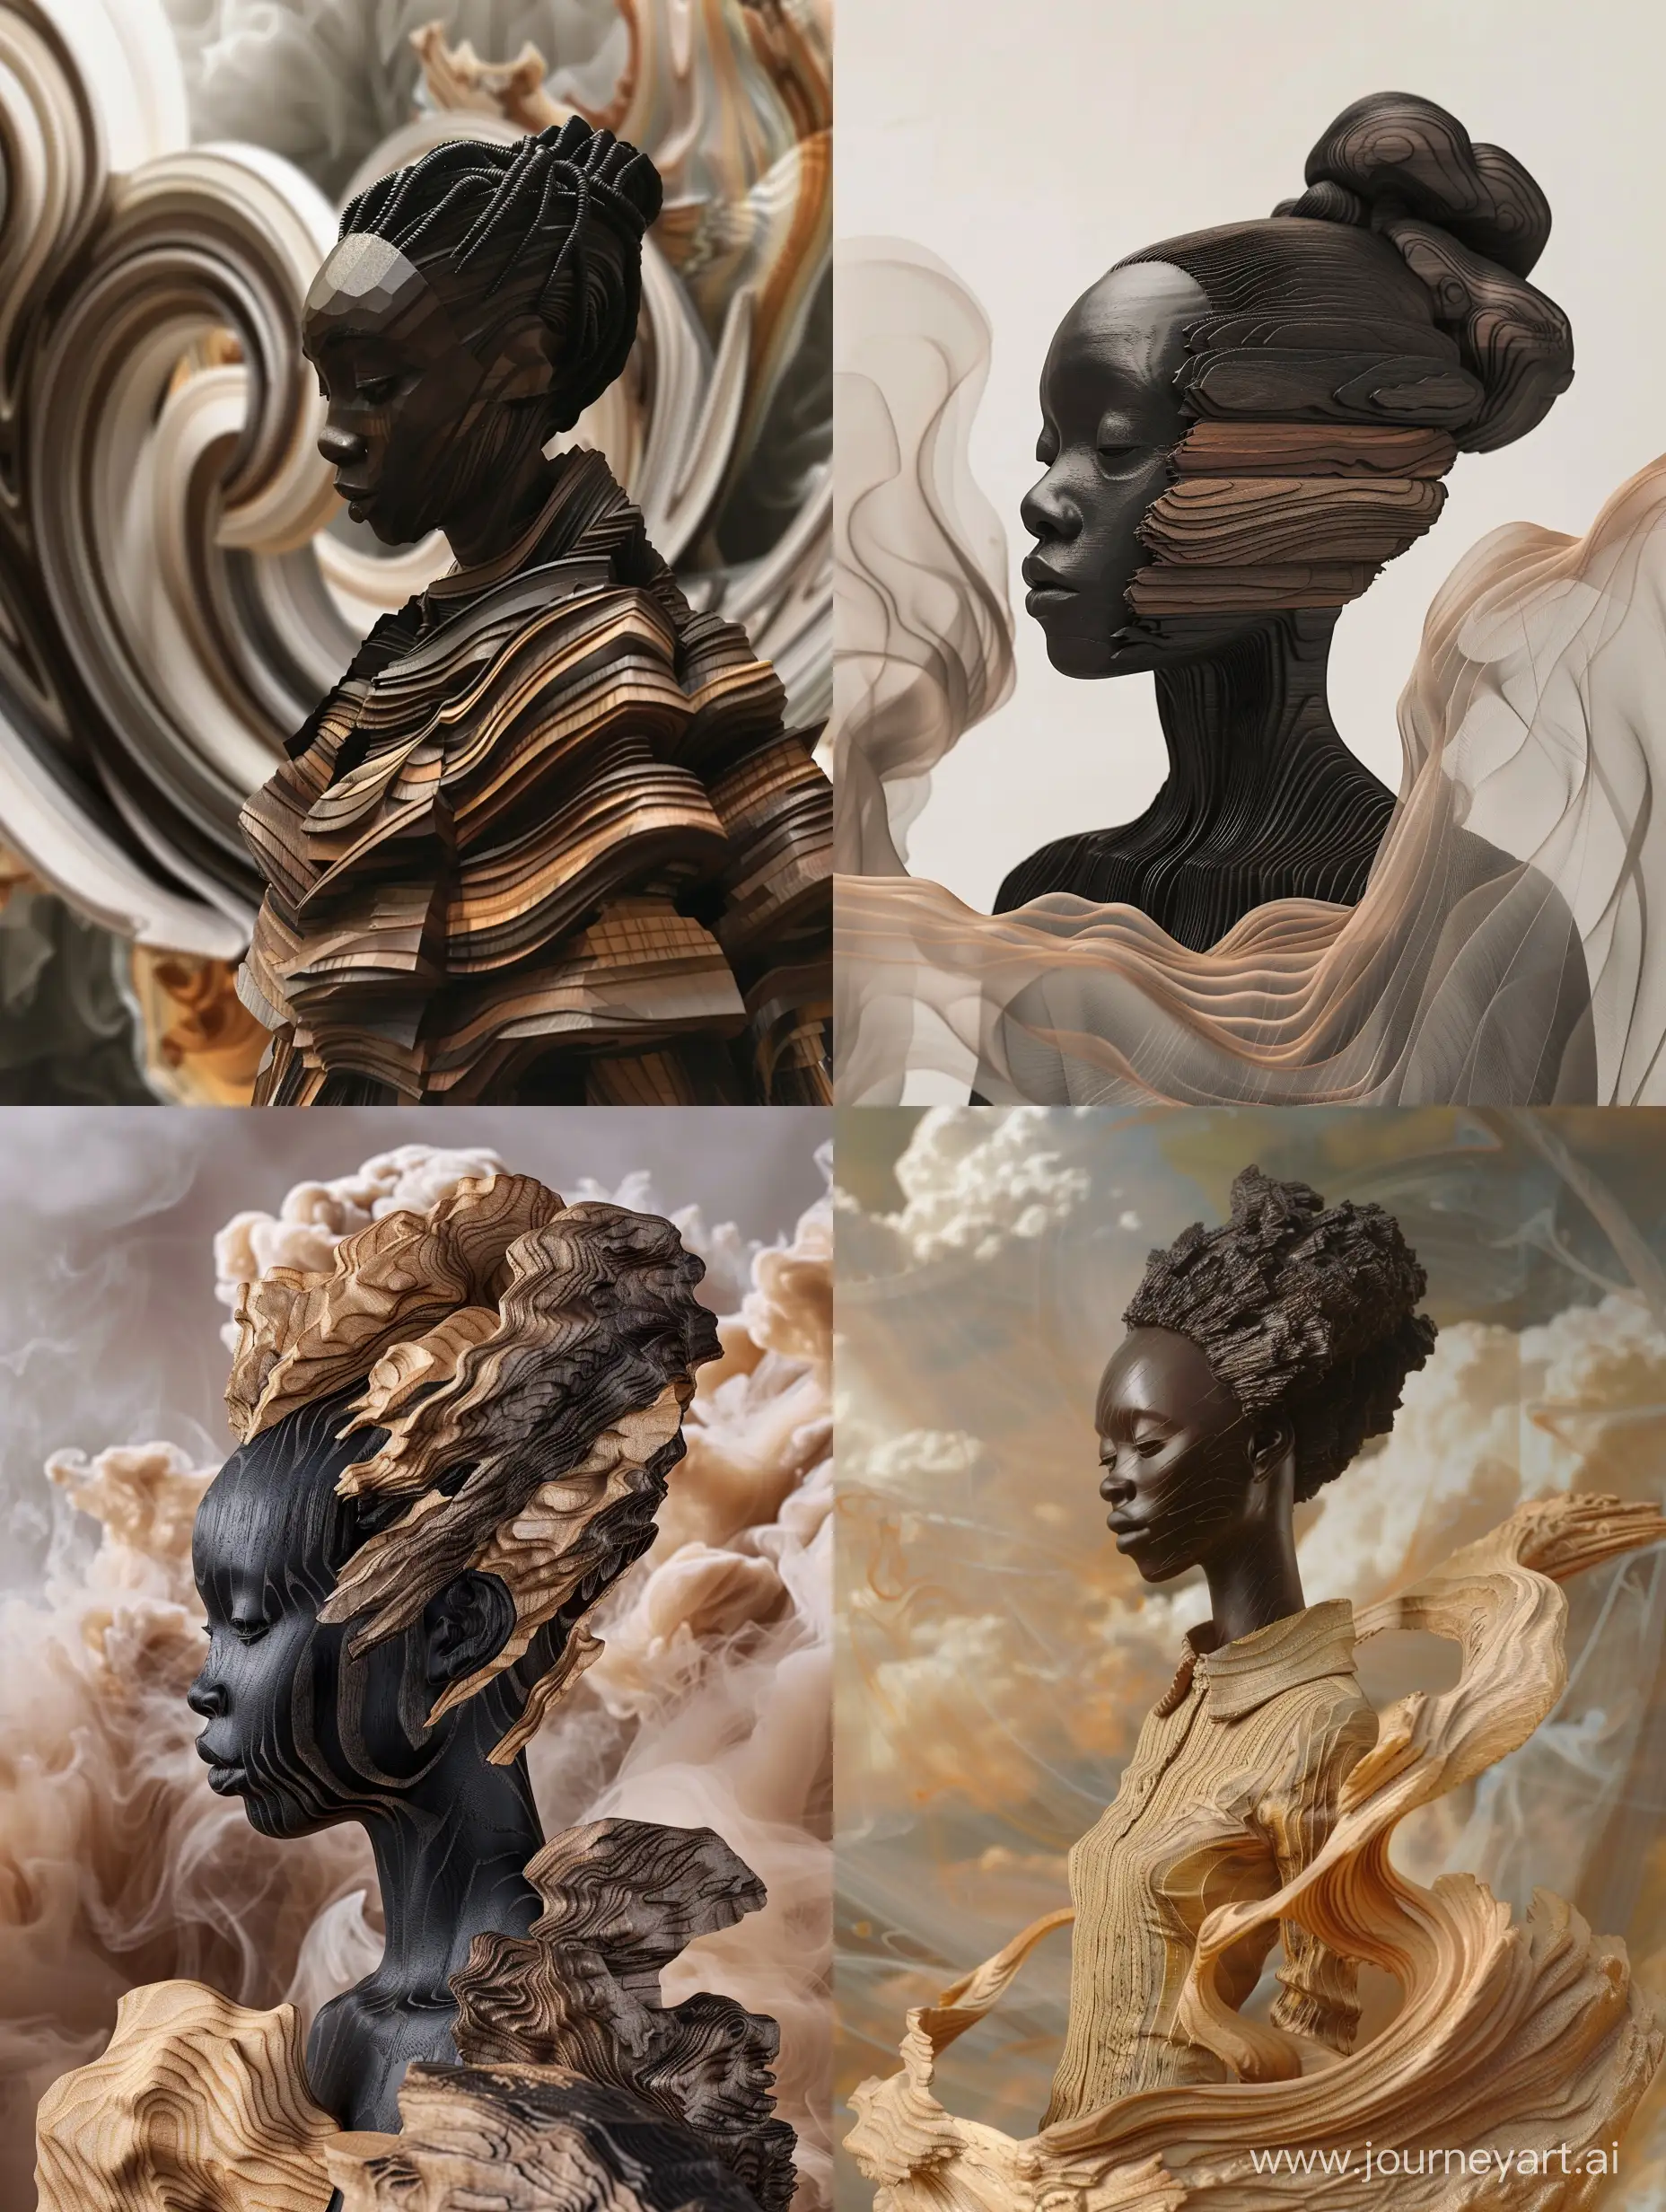  A black woman takes shape as a wooden sculpture, echoing the distinctive style of Hugh Kretschmer. The interplay of wood grain textures and intricate detailing creates a multi-dimensional masterpiece that evokes a sense of wonder. Against a backdrop of ethereal dreamscapes, she stands as a testament to the fusion of creativity and craftsmanship.